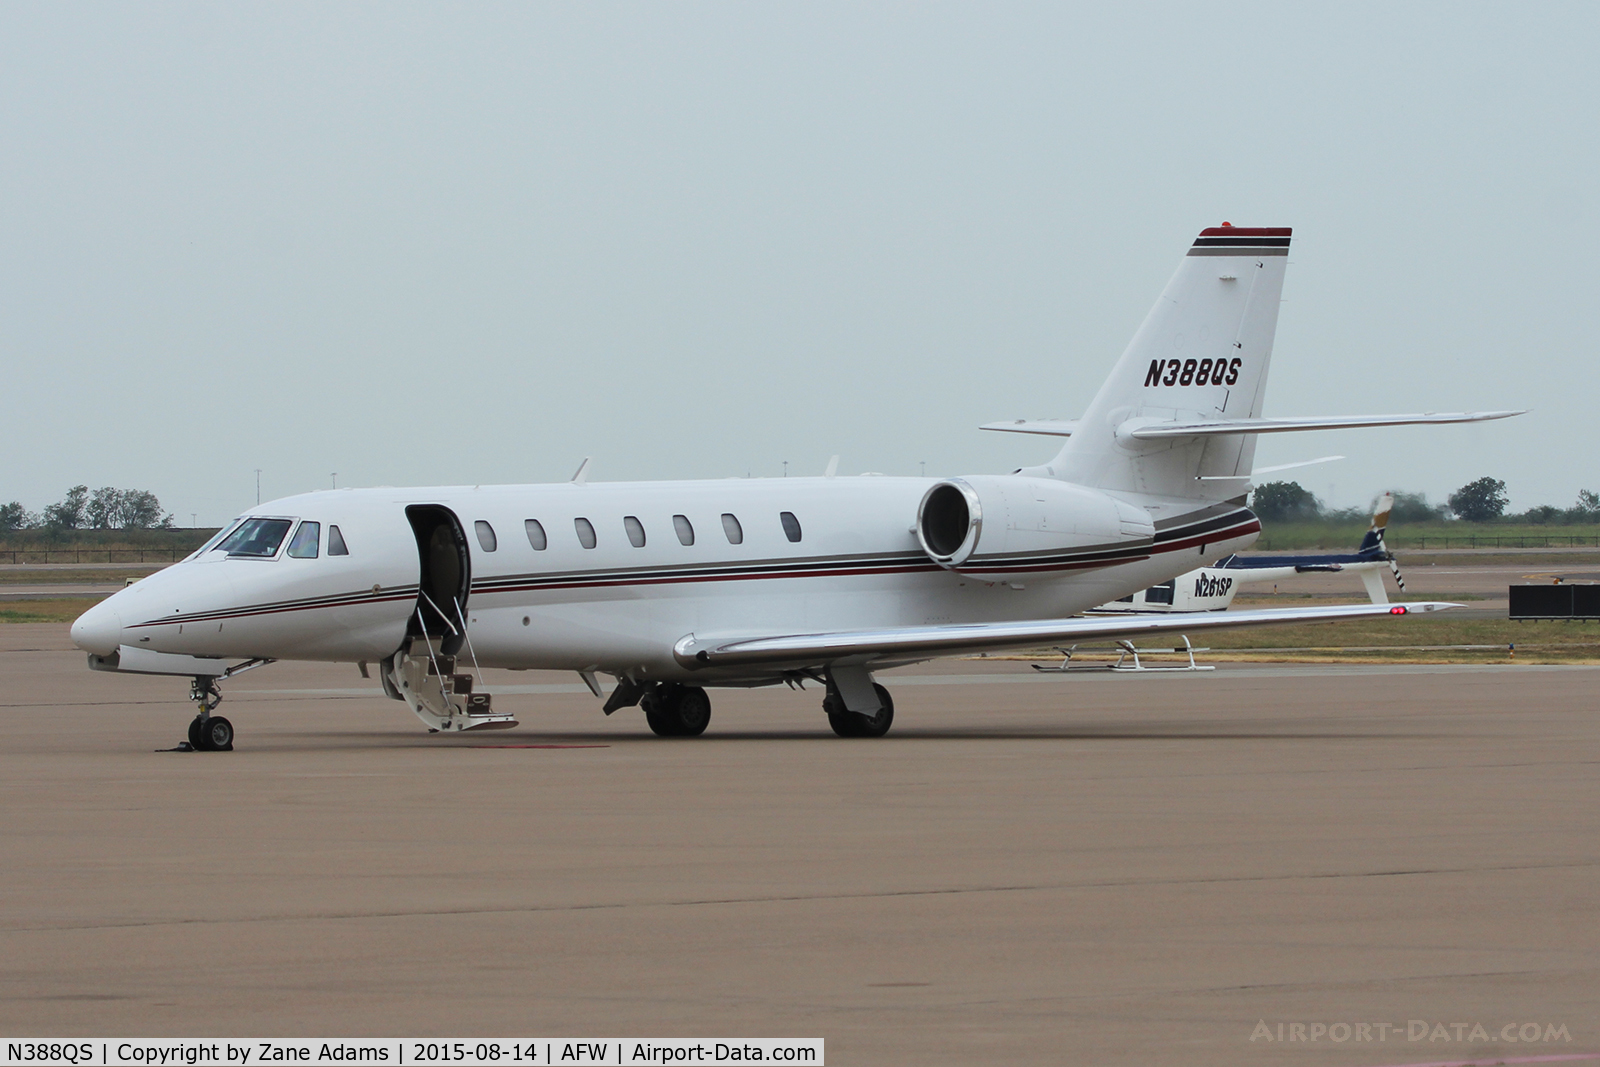 N388QS, 2006 Cessna 680 Citation Sovereign C/N 680-0113, At Alliance Airport - Fort Worth,TX